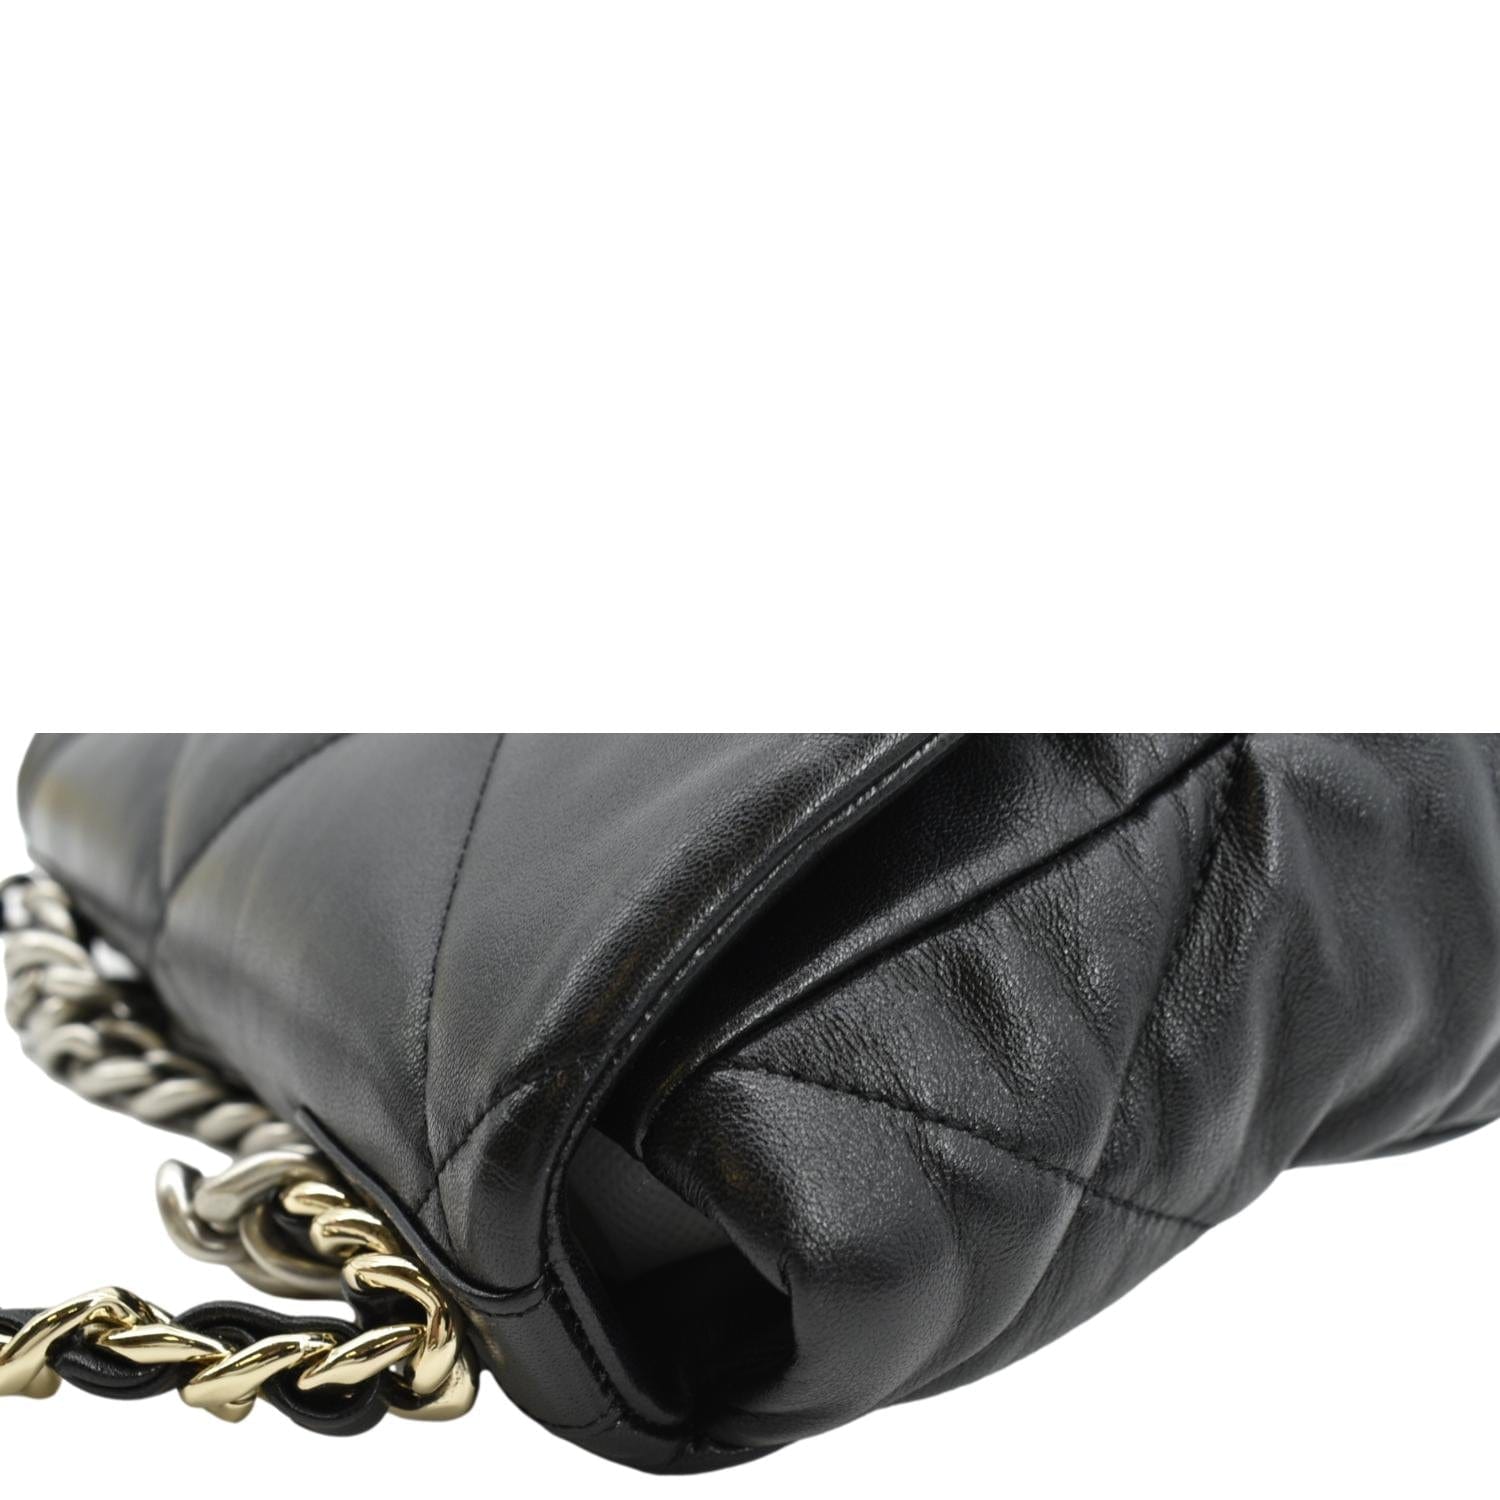 CHANEL 19 Small Flap Quilted Lambskin Leather Shoulder Bag Black - Fin